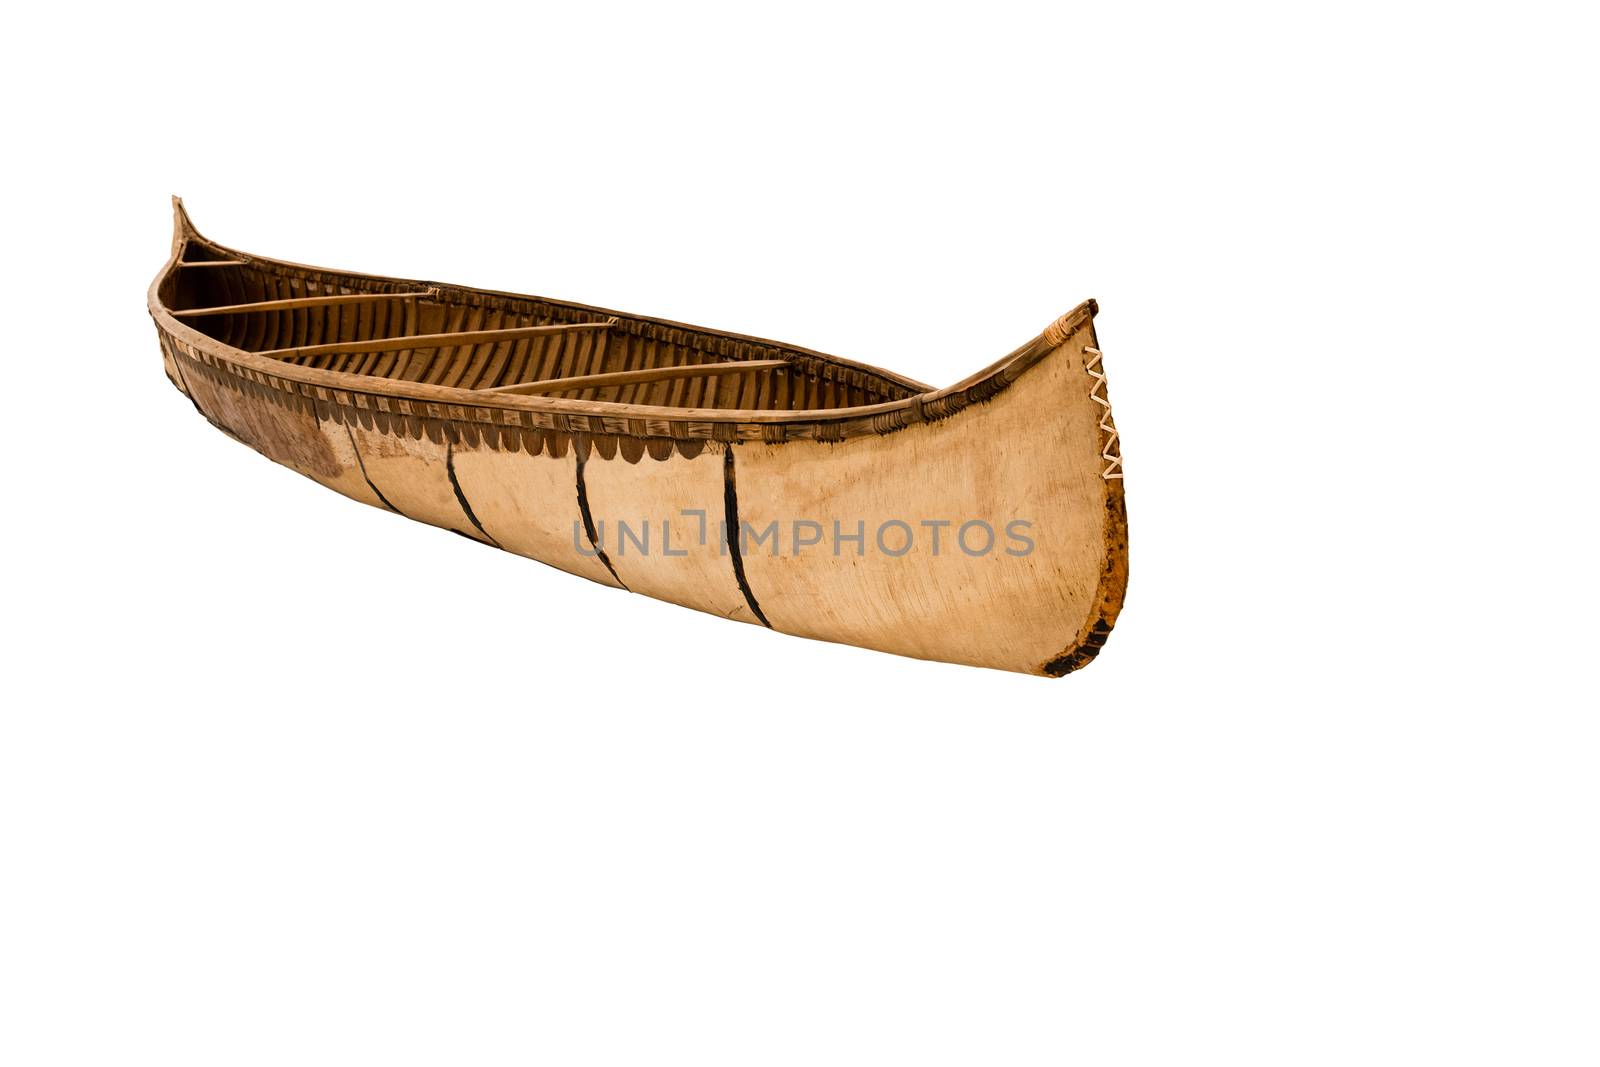 Antique American Thin Wood Canoe Isolated Against White Background